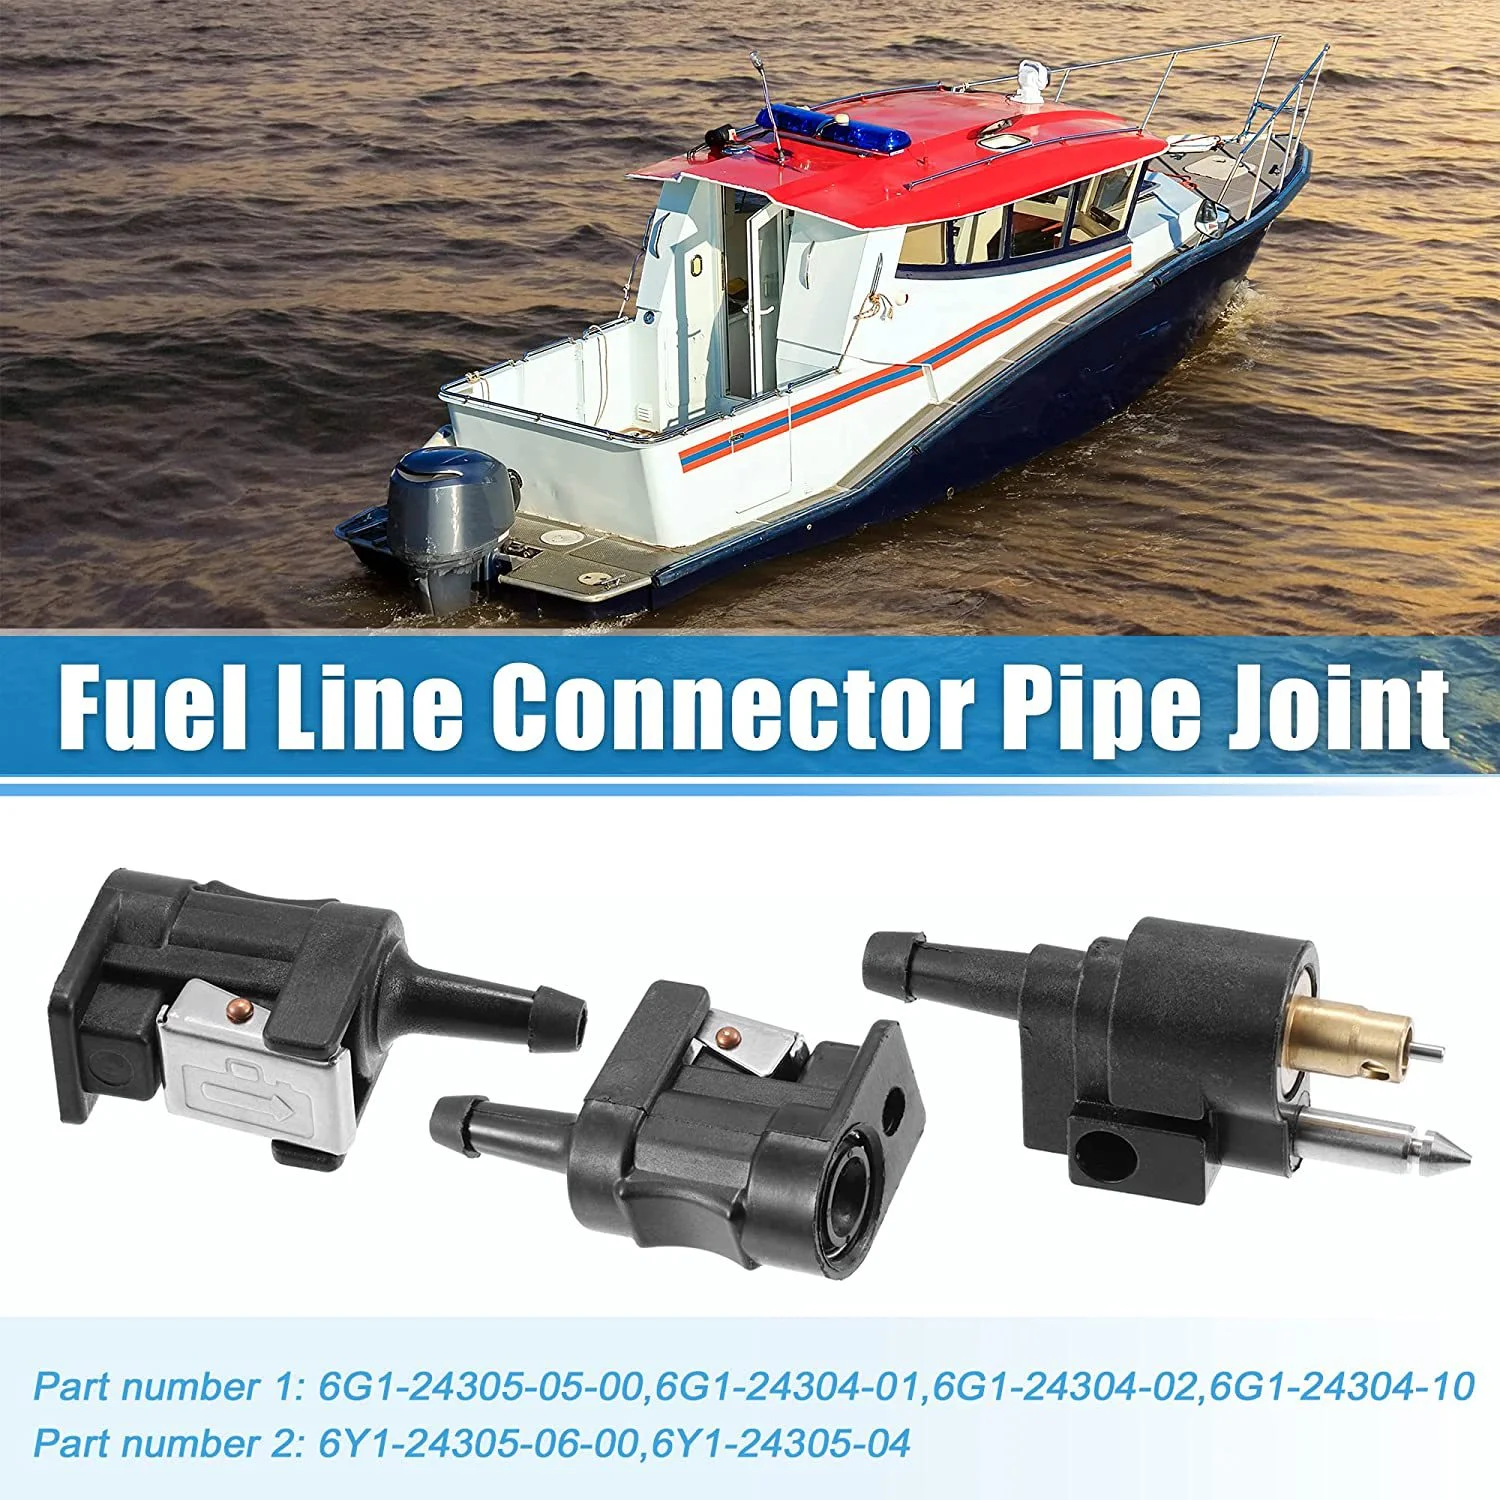 Marine Outboard Oil Tank Fuel Line Male/ Female Sockets Quick Coupling Yachts/Fishing Boats/Fast Boats/Cruise Ships Accessories genuine marine r20 protected inflatable boat fenders pvc ship anti collision ball for yachts boats inflatable fender accessories